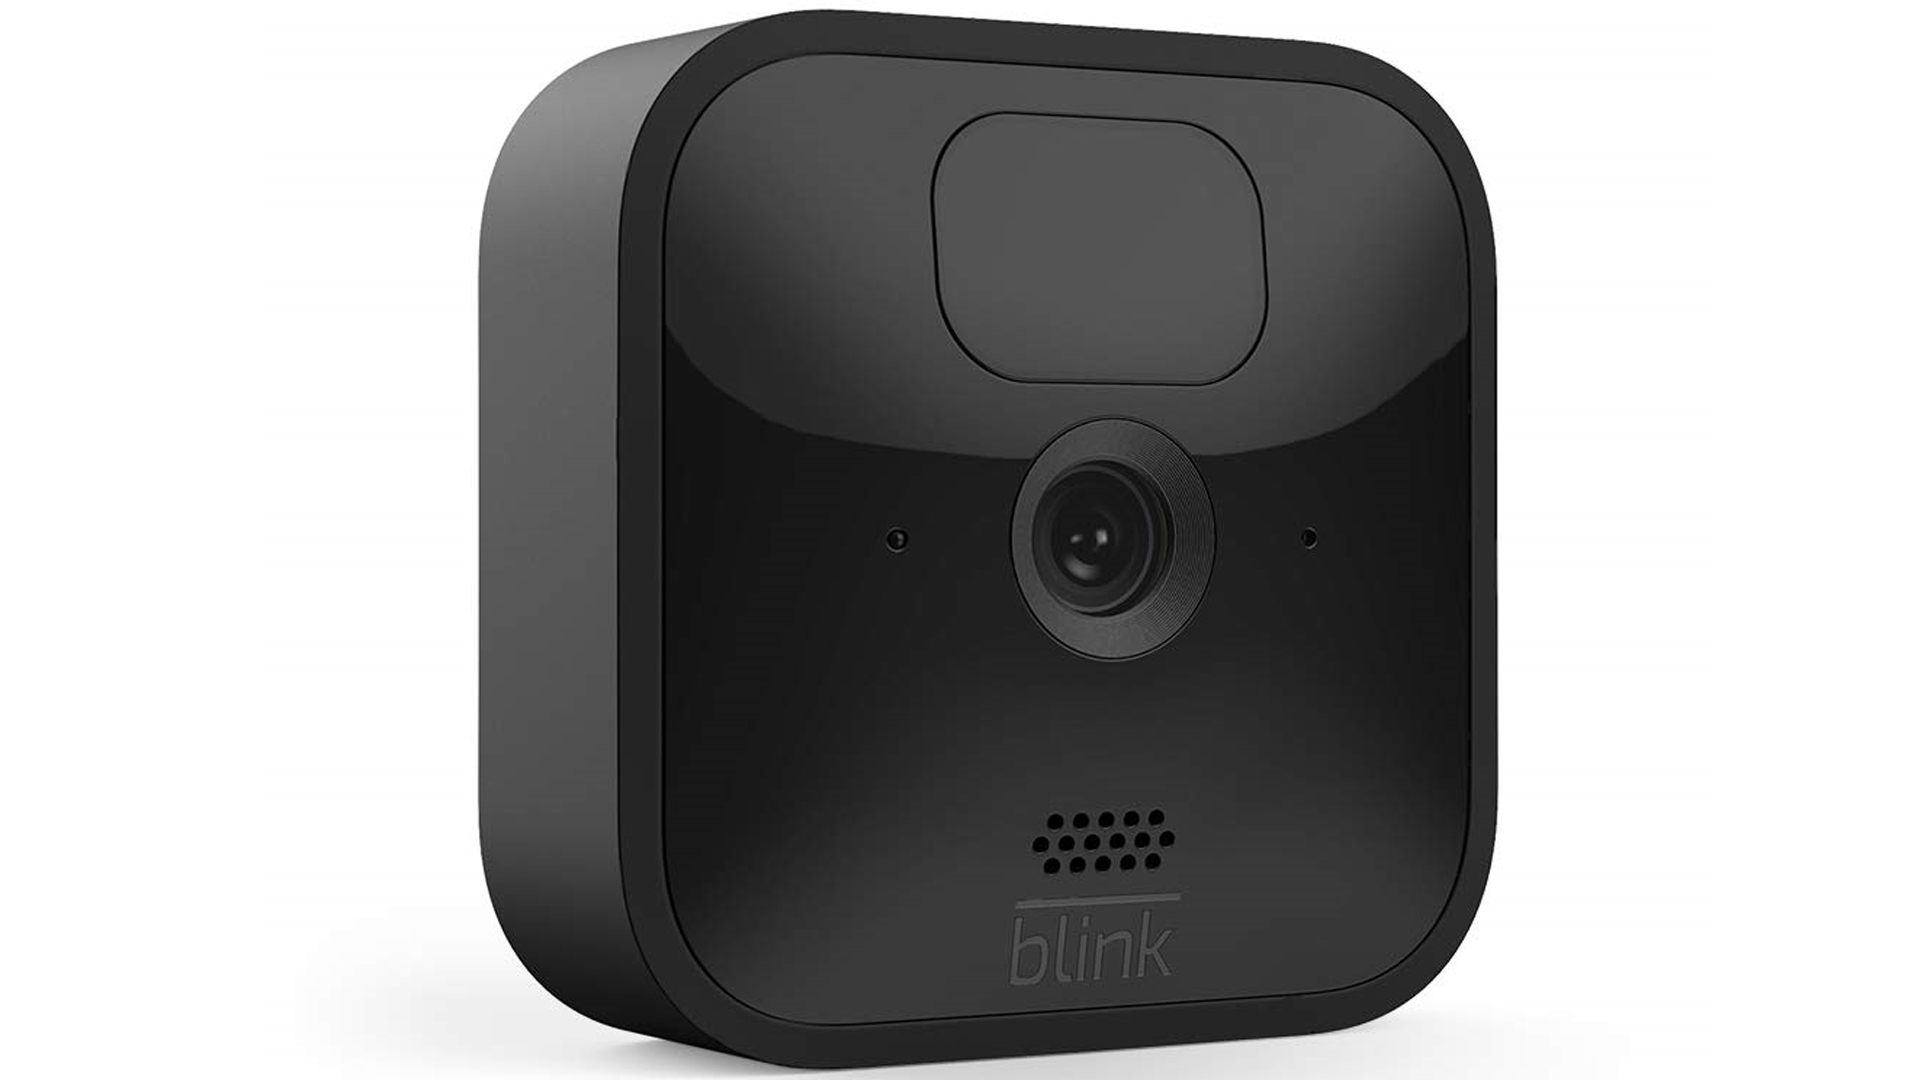 Amazon's Blink Outdoor security camera on a white background.